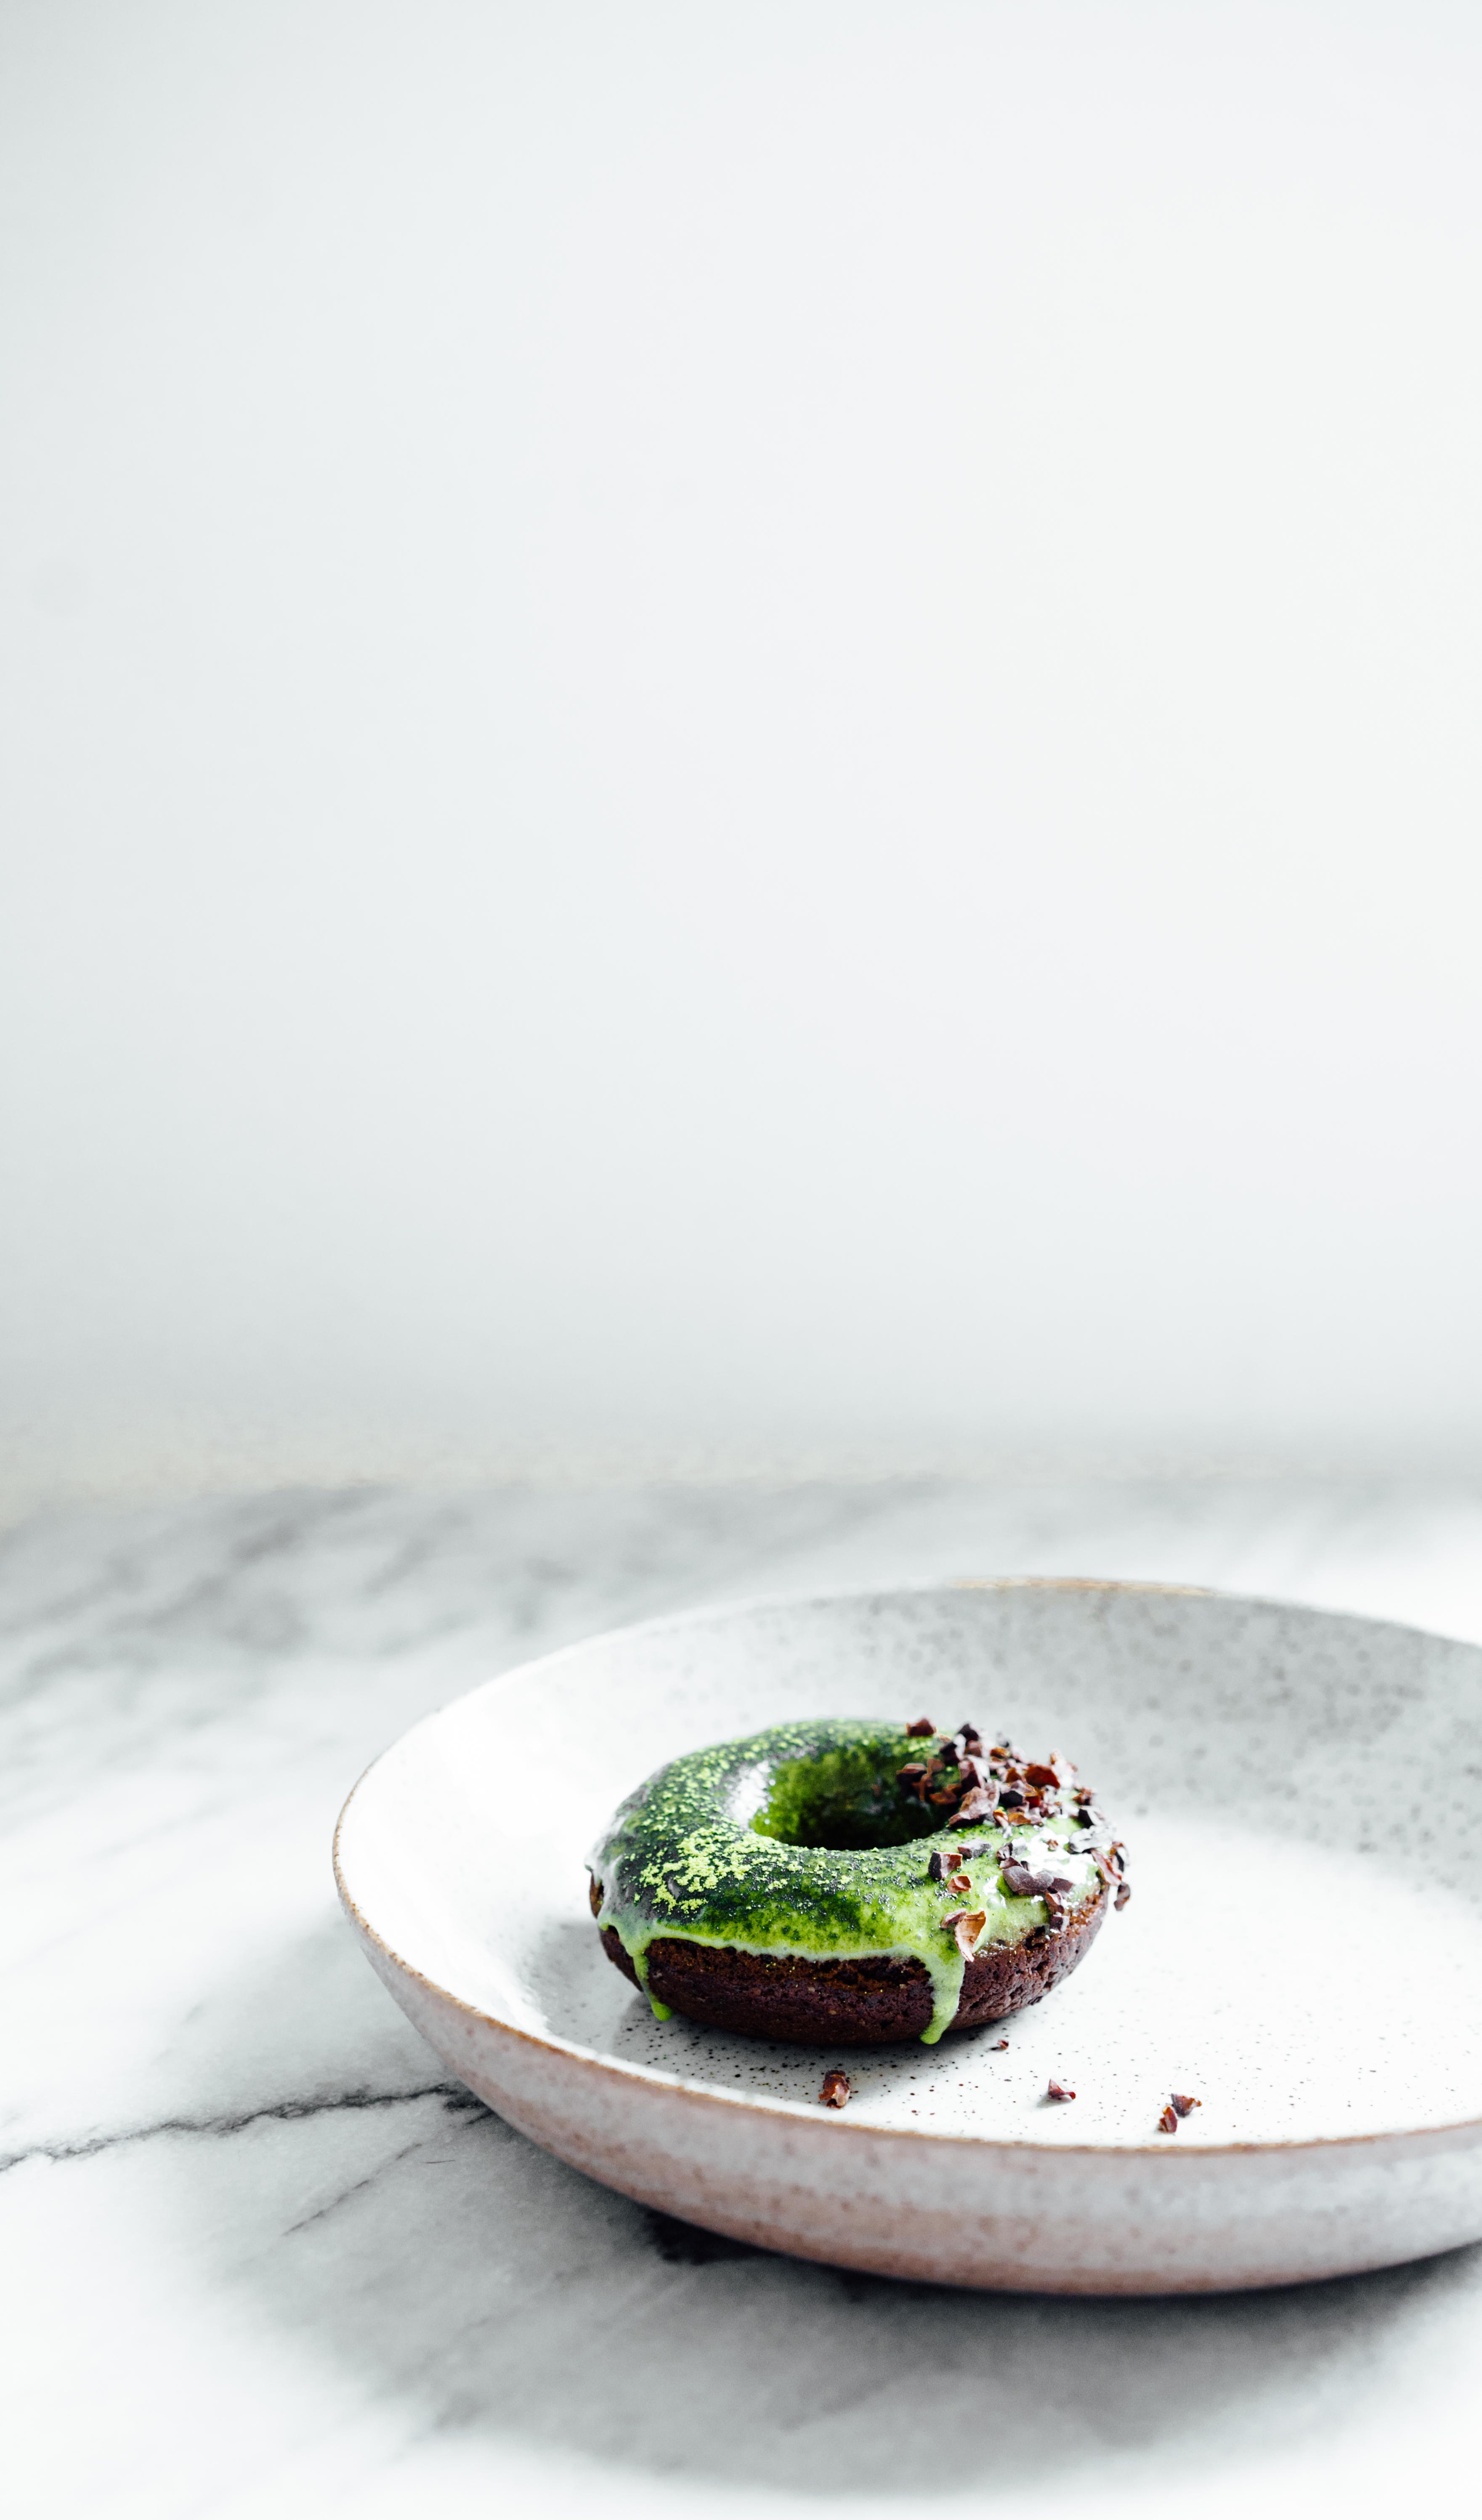 Chocolate Donuts with Matcha Glaze | TENDING the TABLE